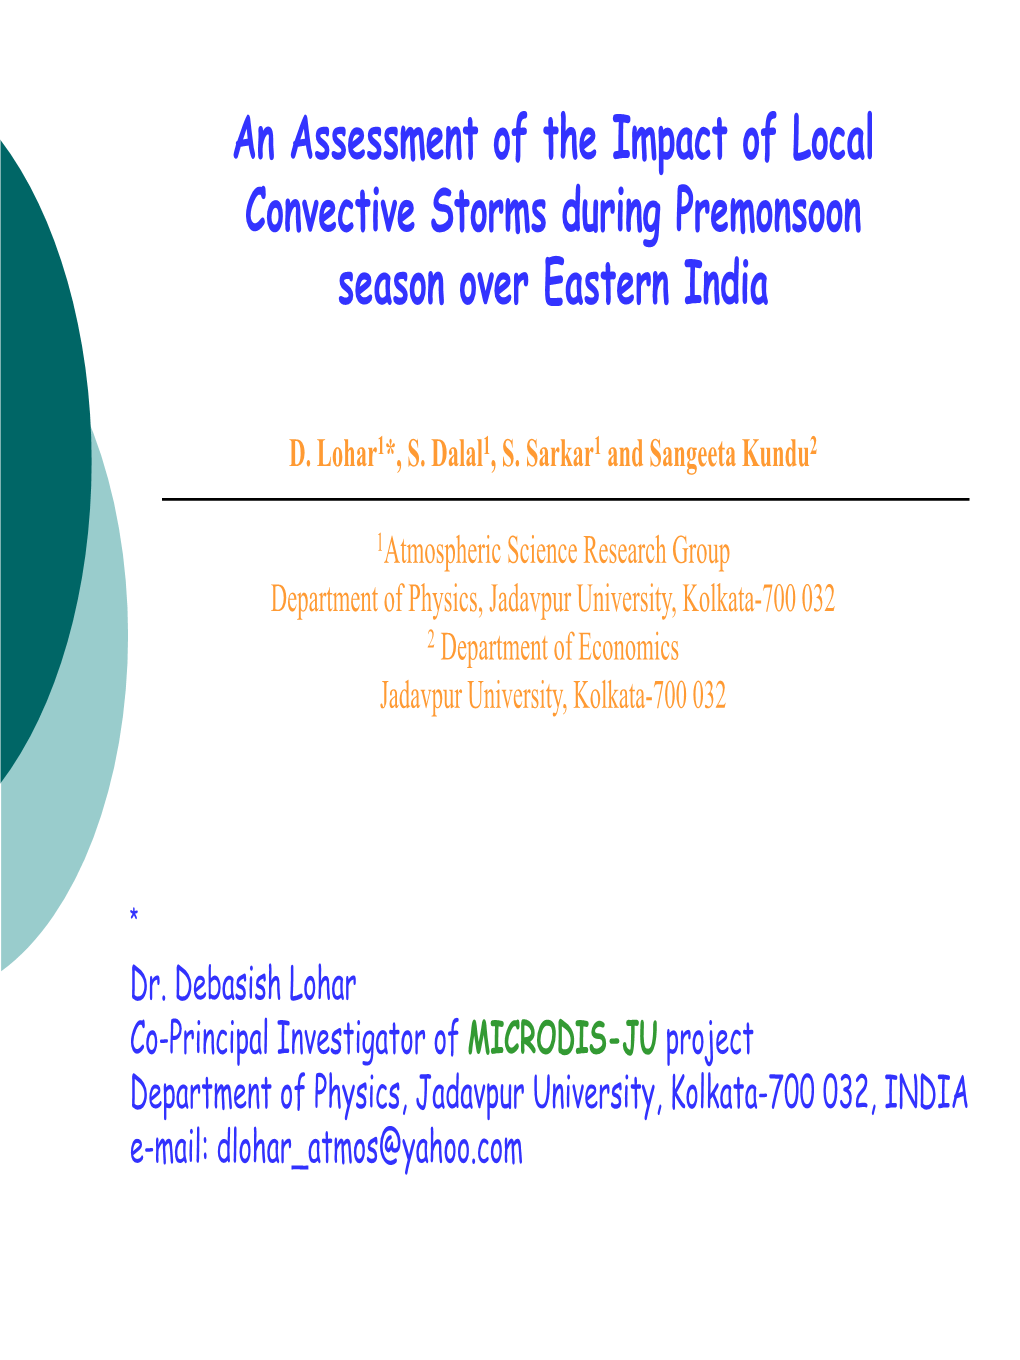 An Assessment of the Impact of Local Convective Storms During Premonsoon Season Over Eastern India